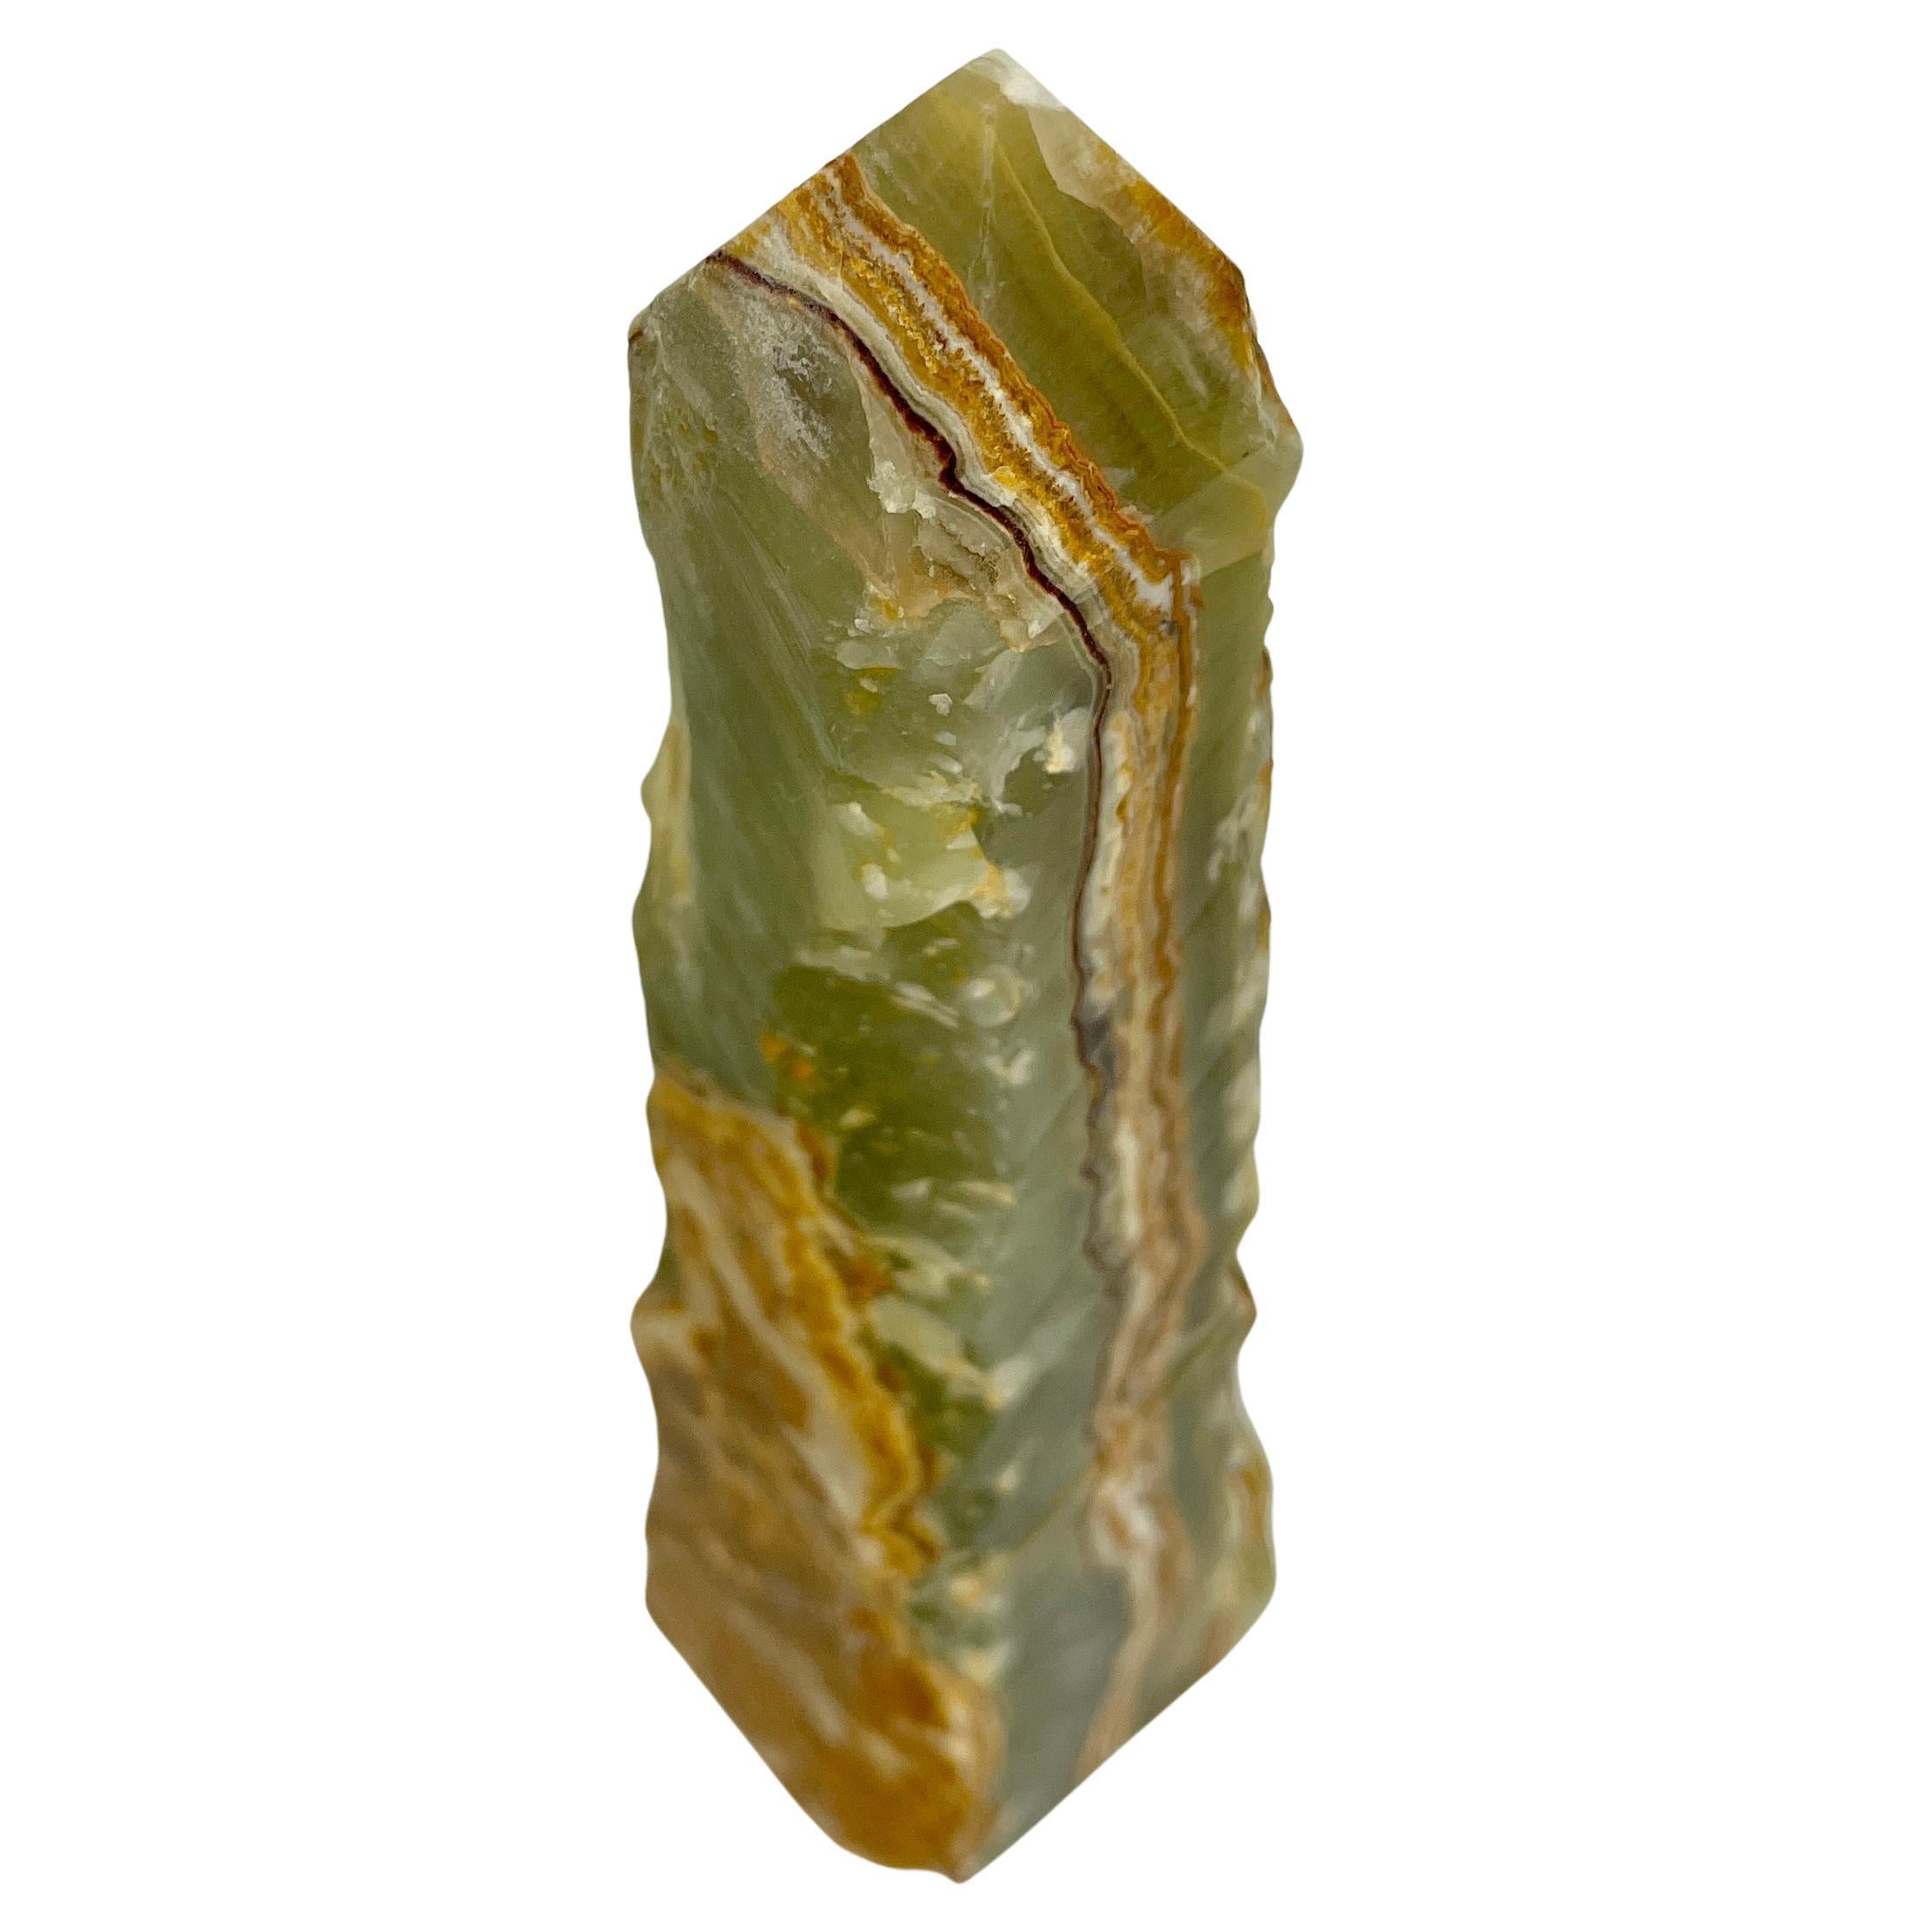 Hand-Crafted Green Onyx Obelisk With Natural Rough Edge Finish